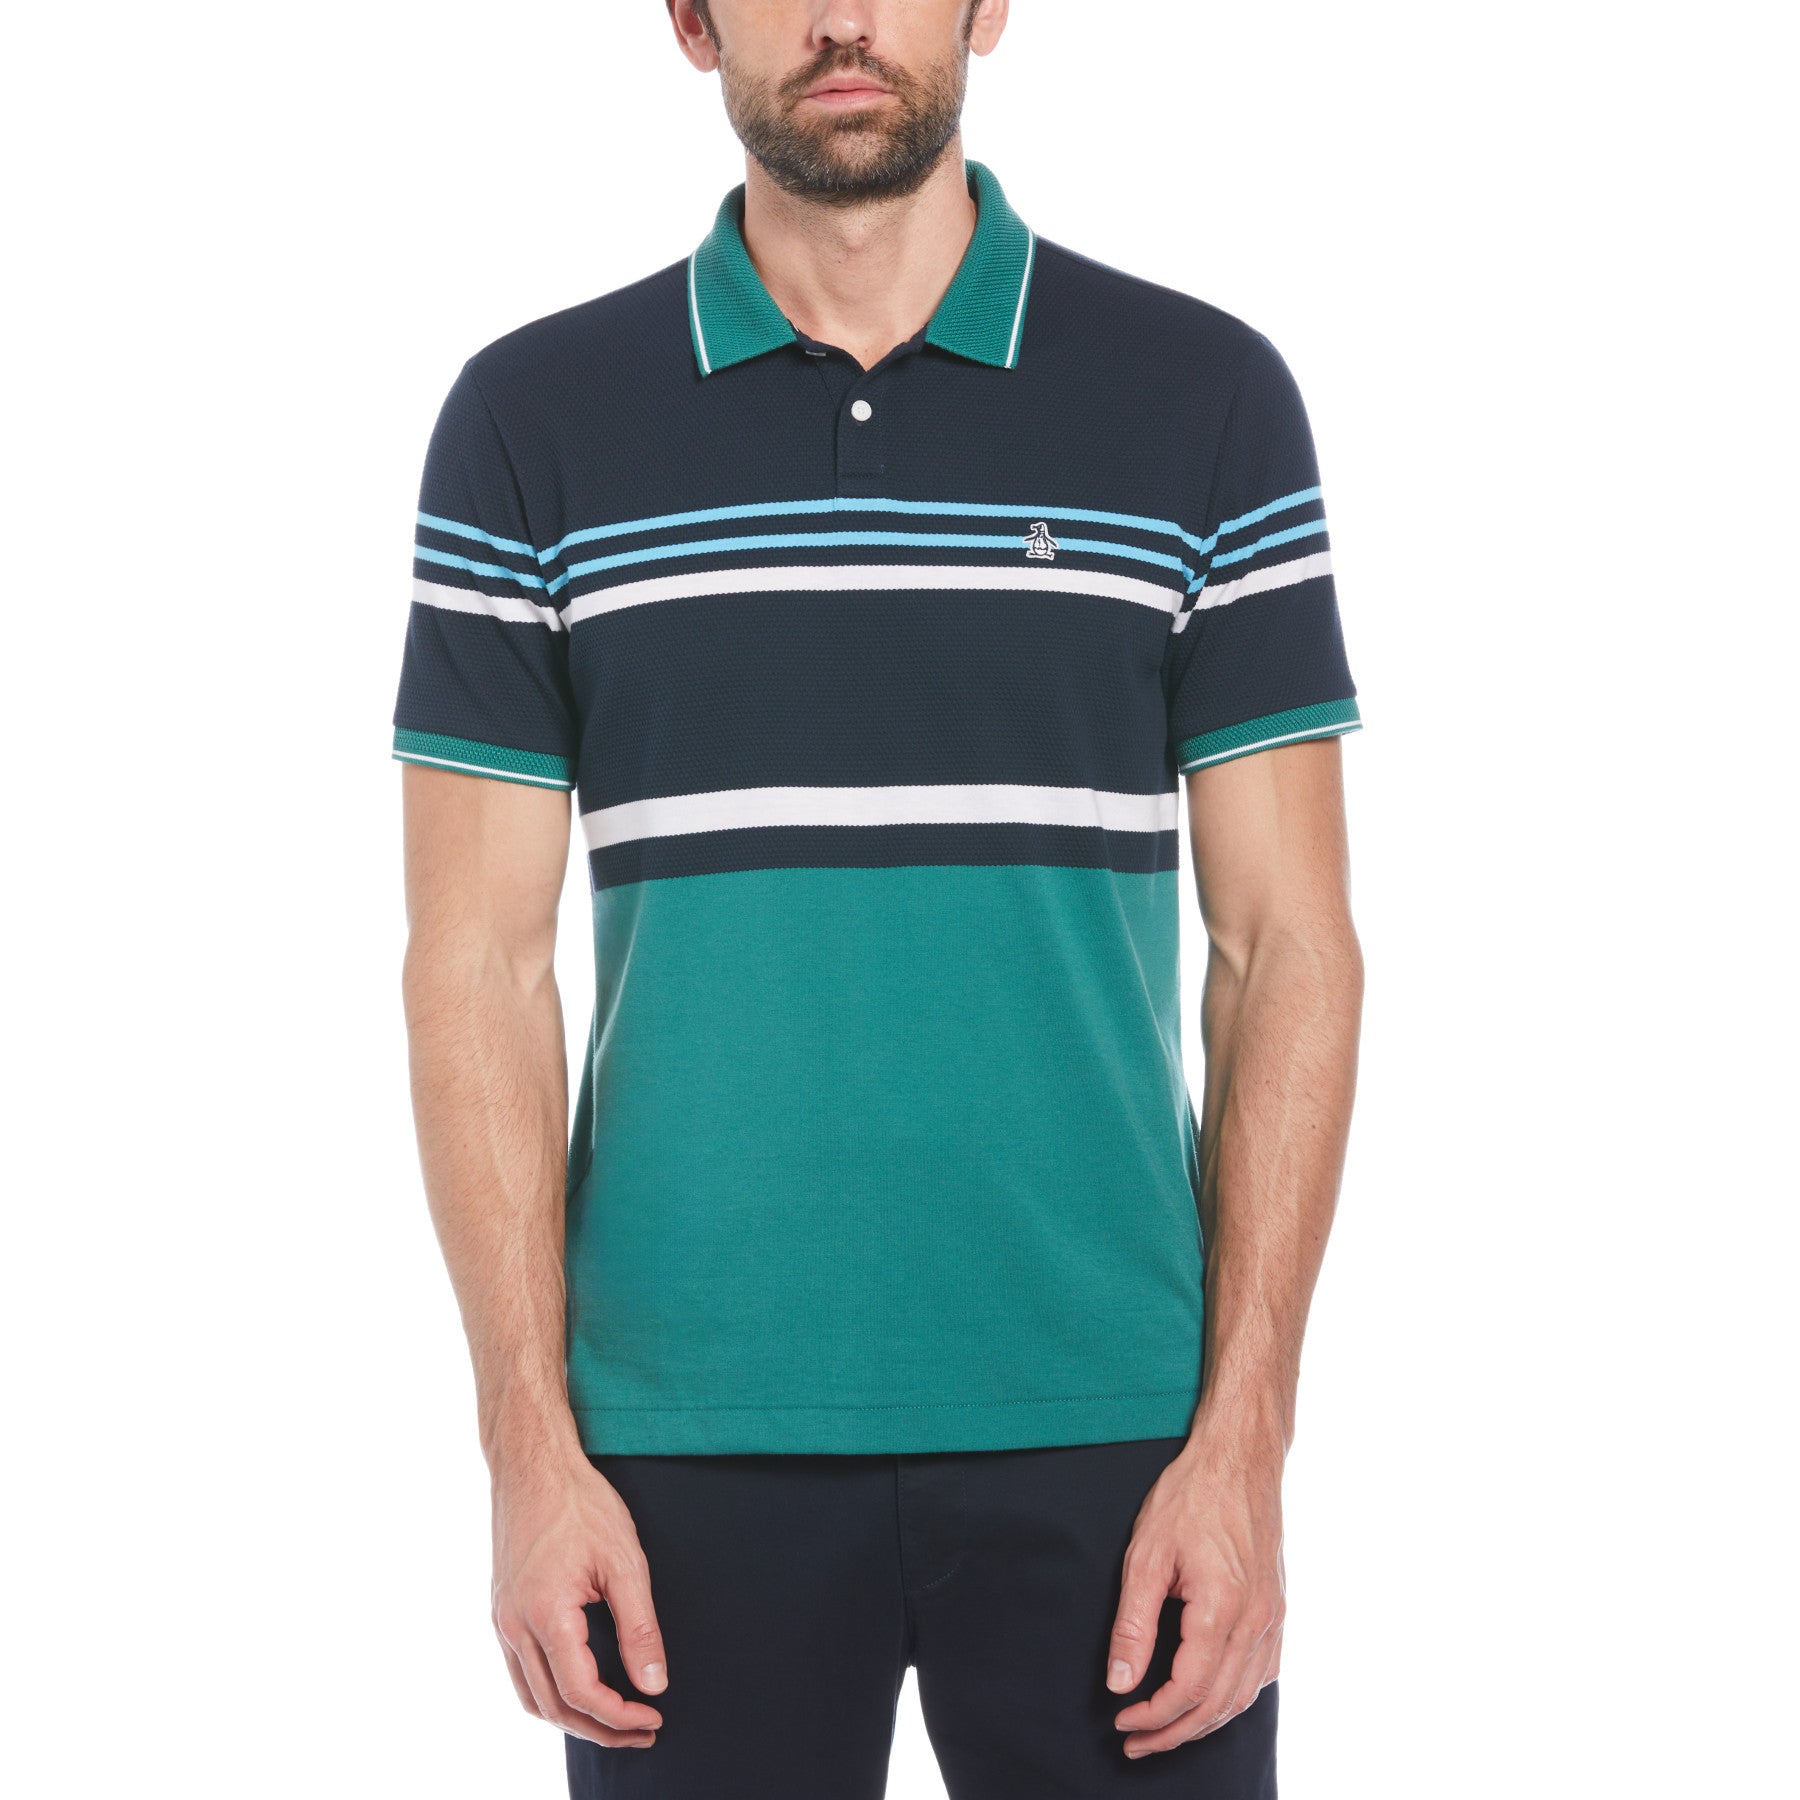 View Jacquard Honeycomb Stripe Pattern Short Sleeve Polo Shirt In Antique G information